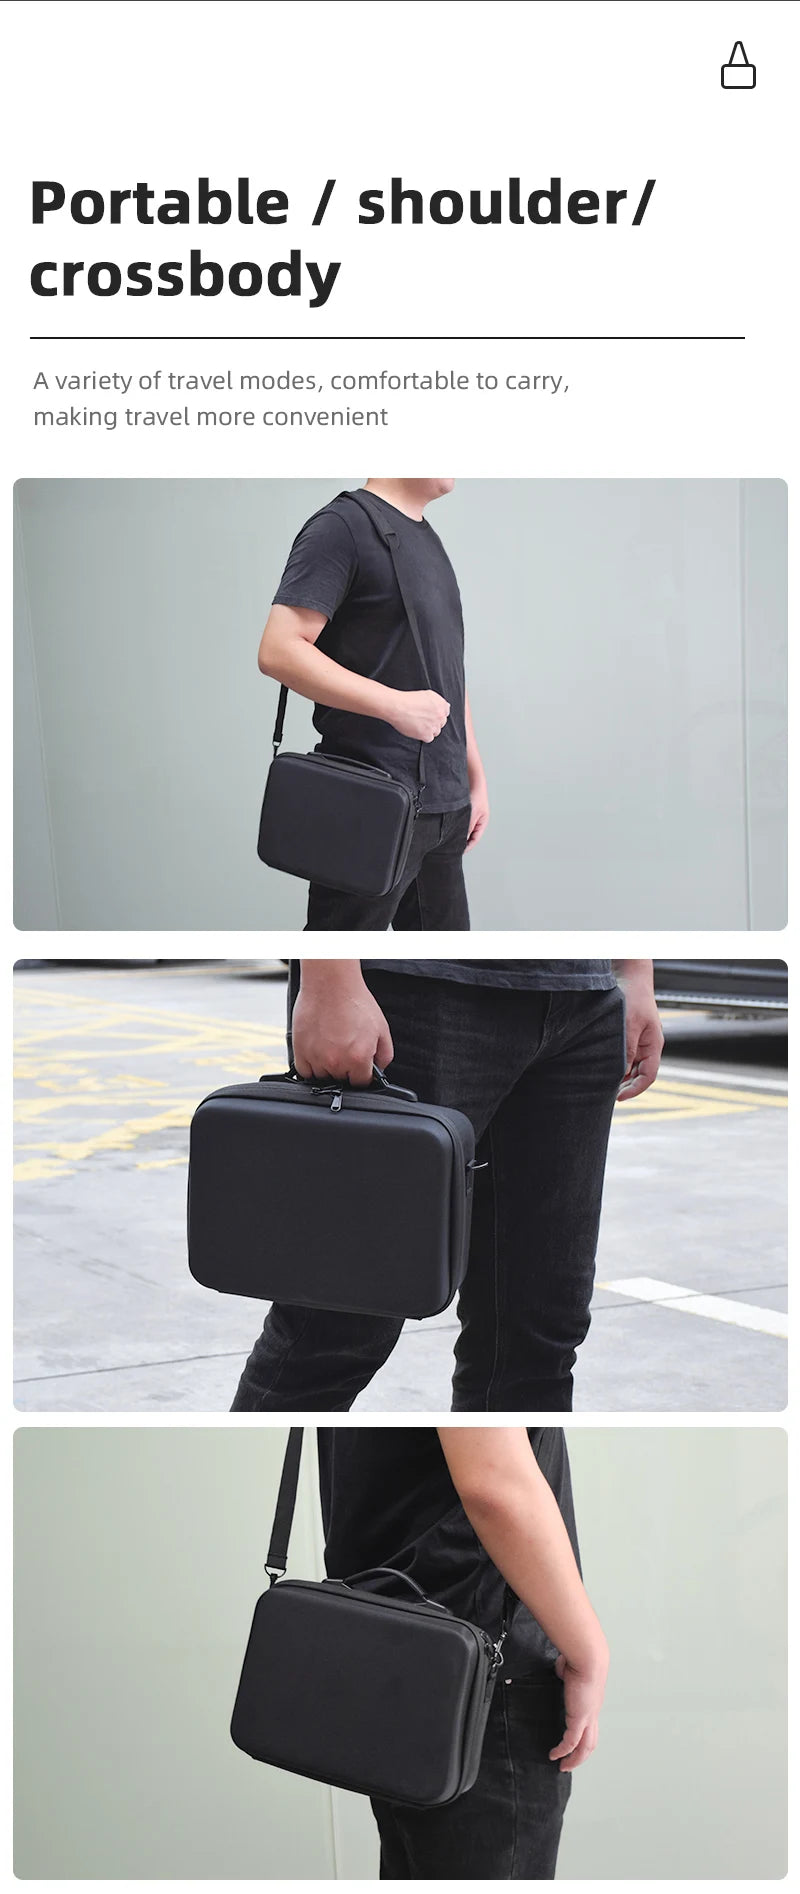 portable / shoulder/ crossbody A variety of travel modes, making travel more convenient .